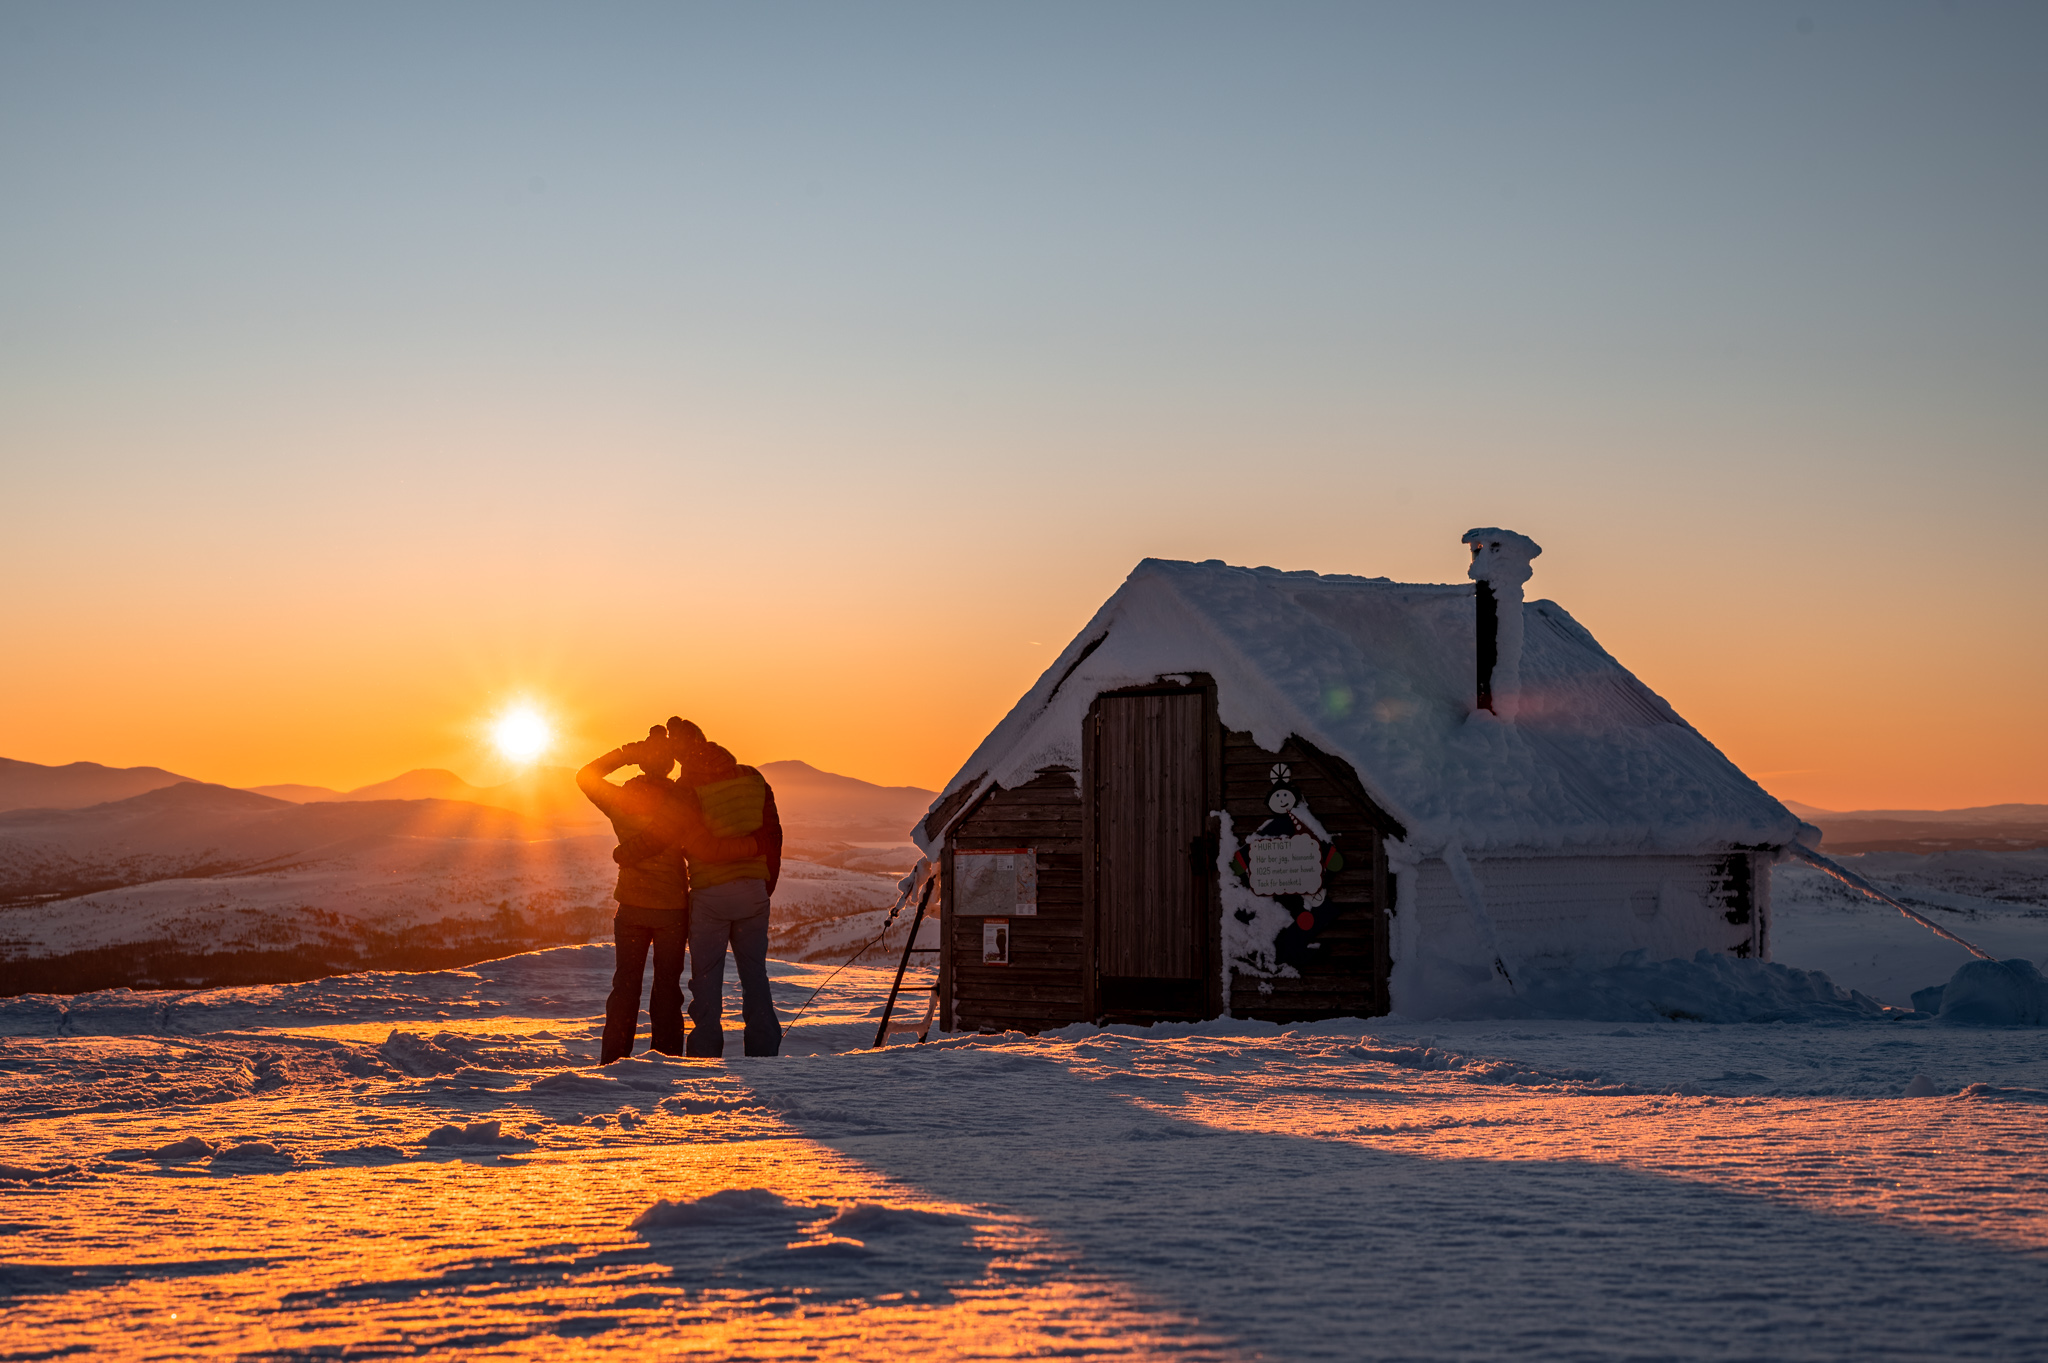 What a sunset seen from the small hut at Välliste top 